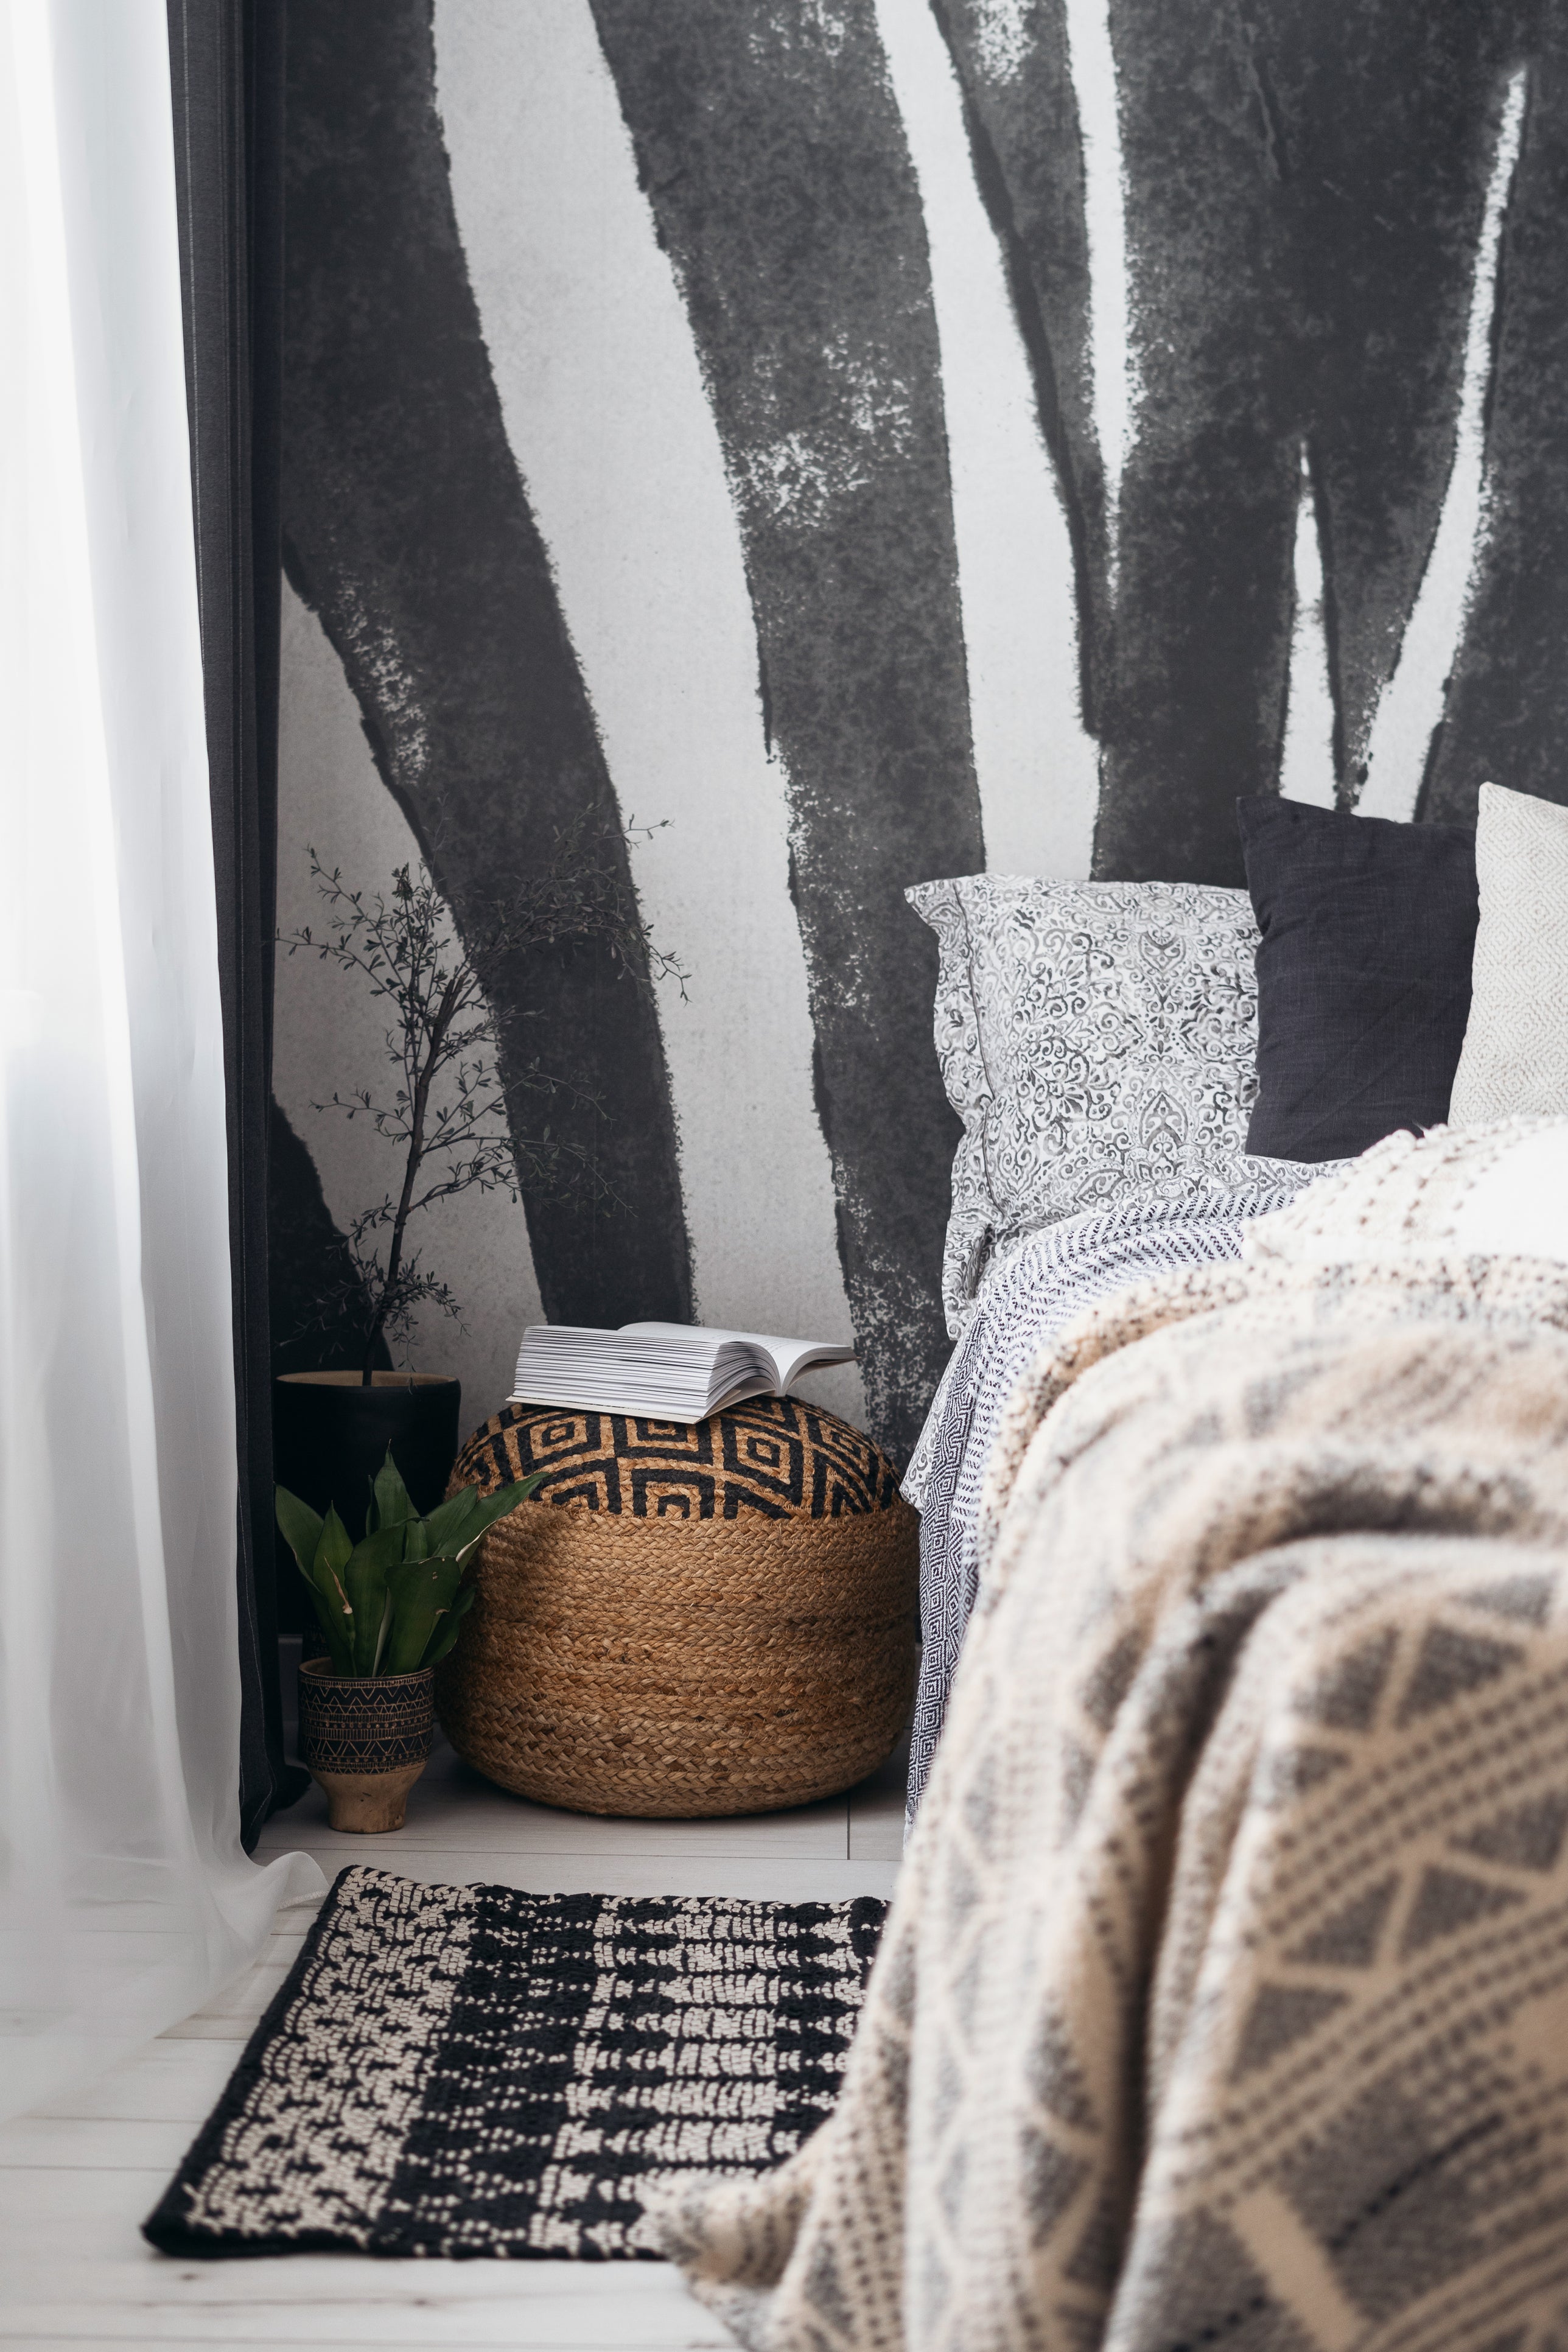 monochrome wall art and natural, textured bedding boho style